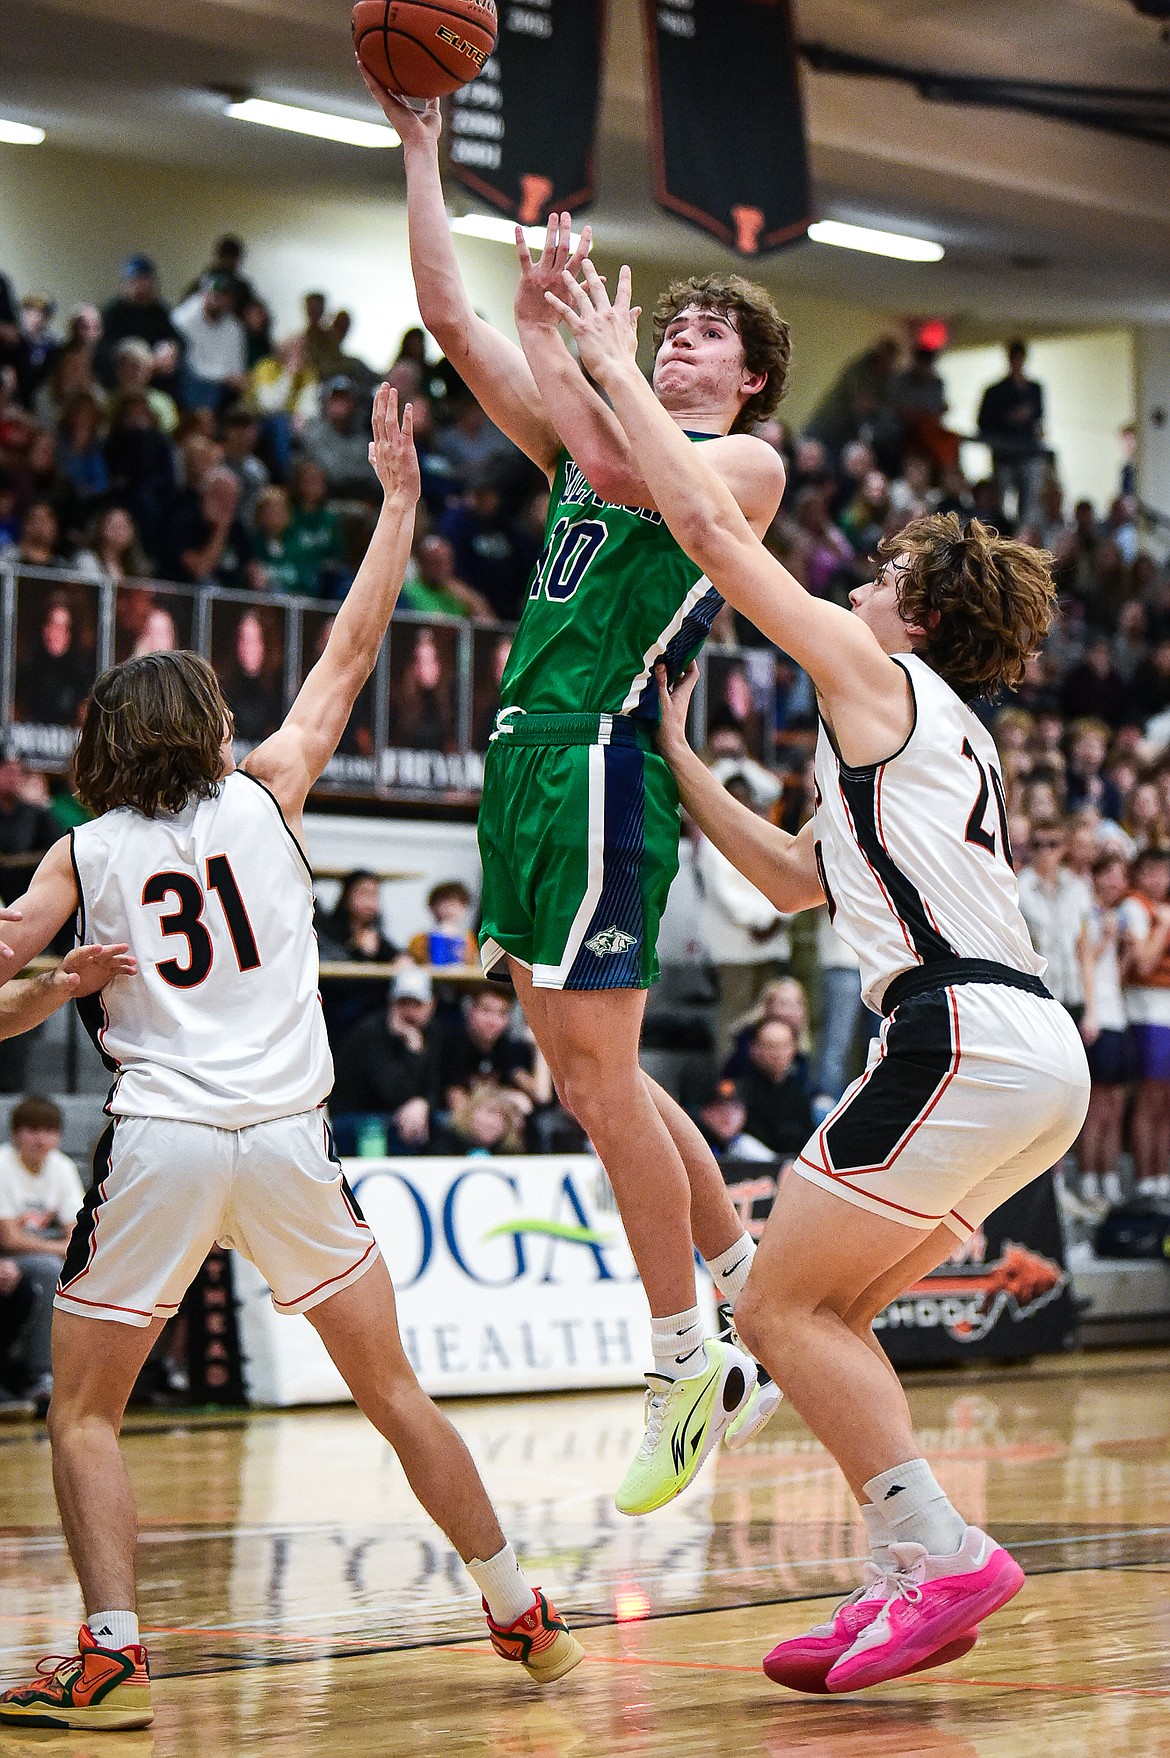 Glacier's Brantly Salmonsen (10) drives to the basket in the first half against Flathead at Flathead High School on Friday, Jan. 19. (Casey Kreider/Daily Inter Lake)